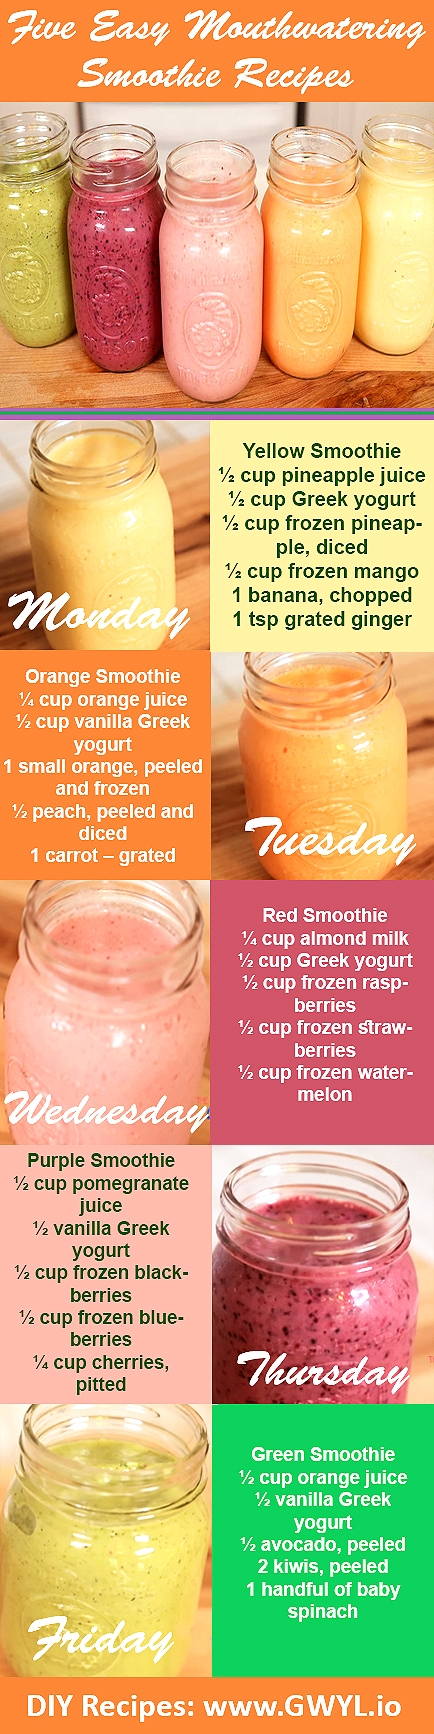 Learn how to make five easy smoothie recipes, one for each day of the week! Video and written instructions here: